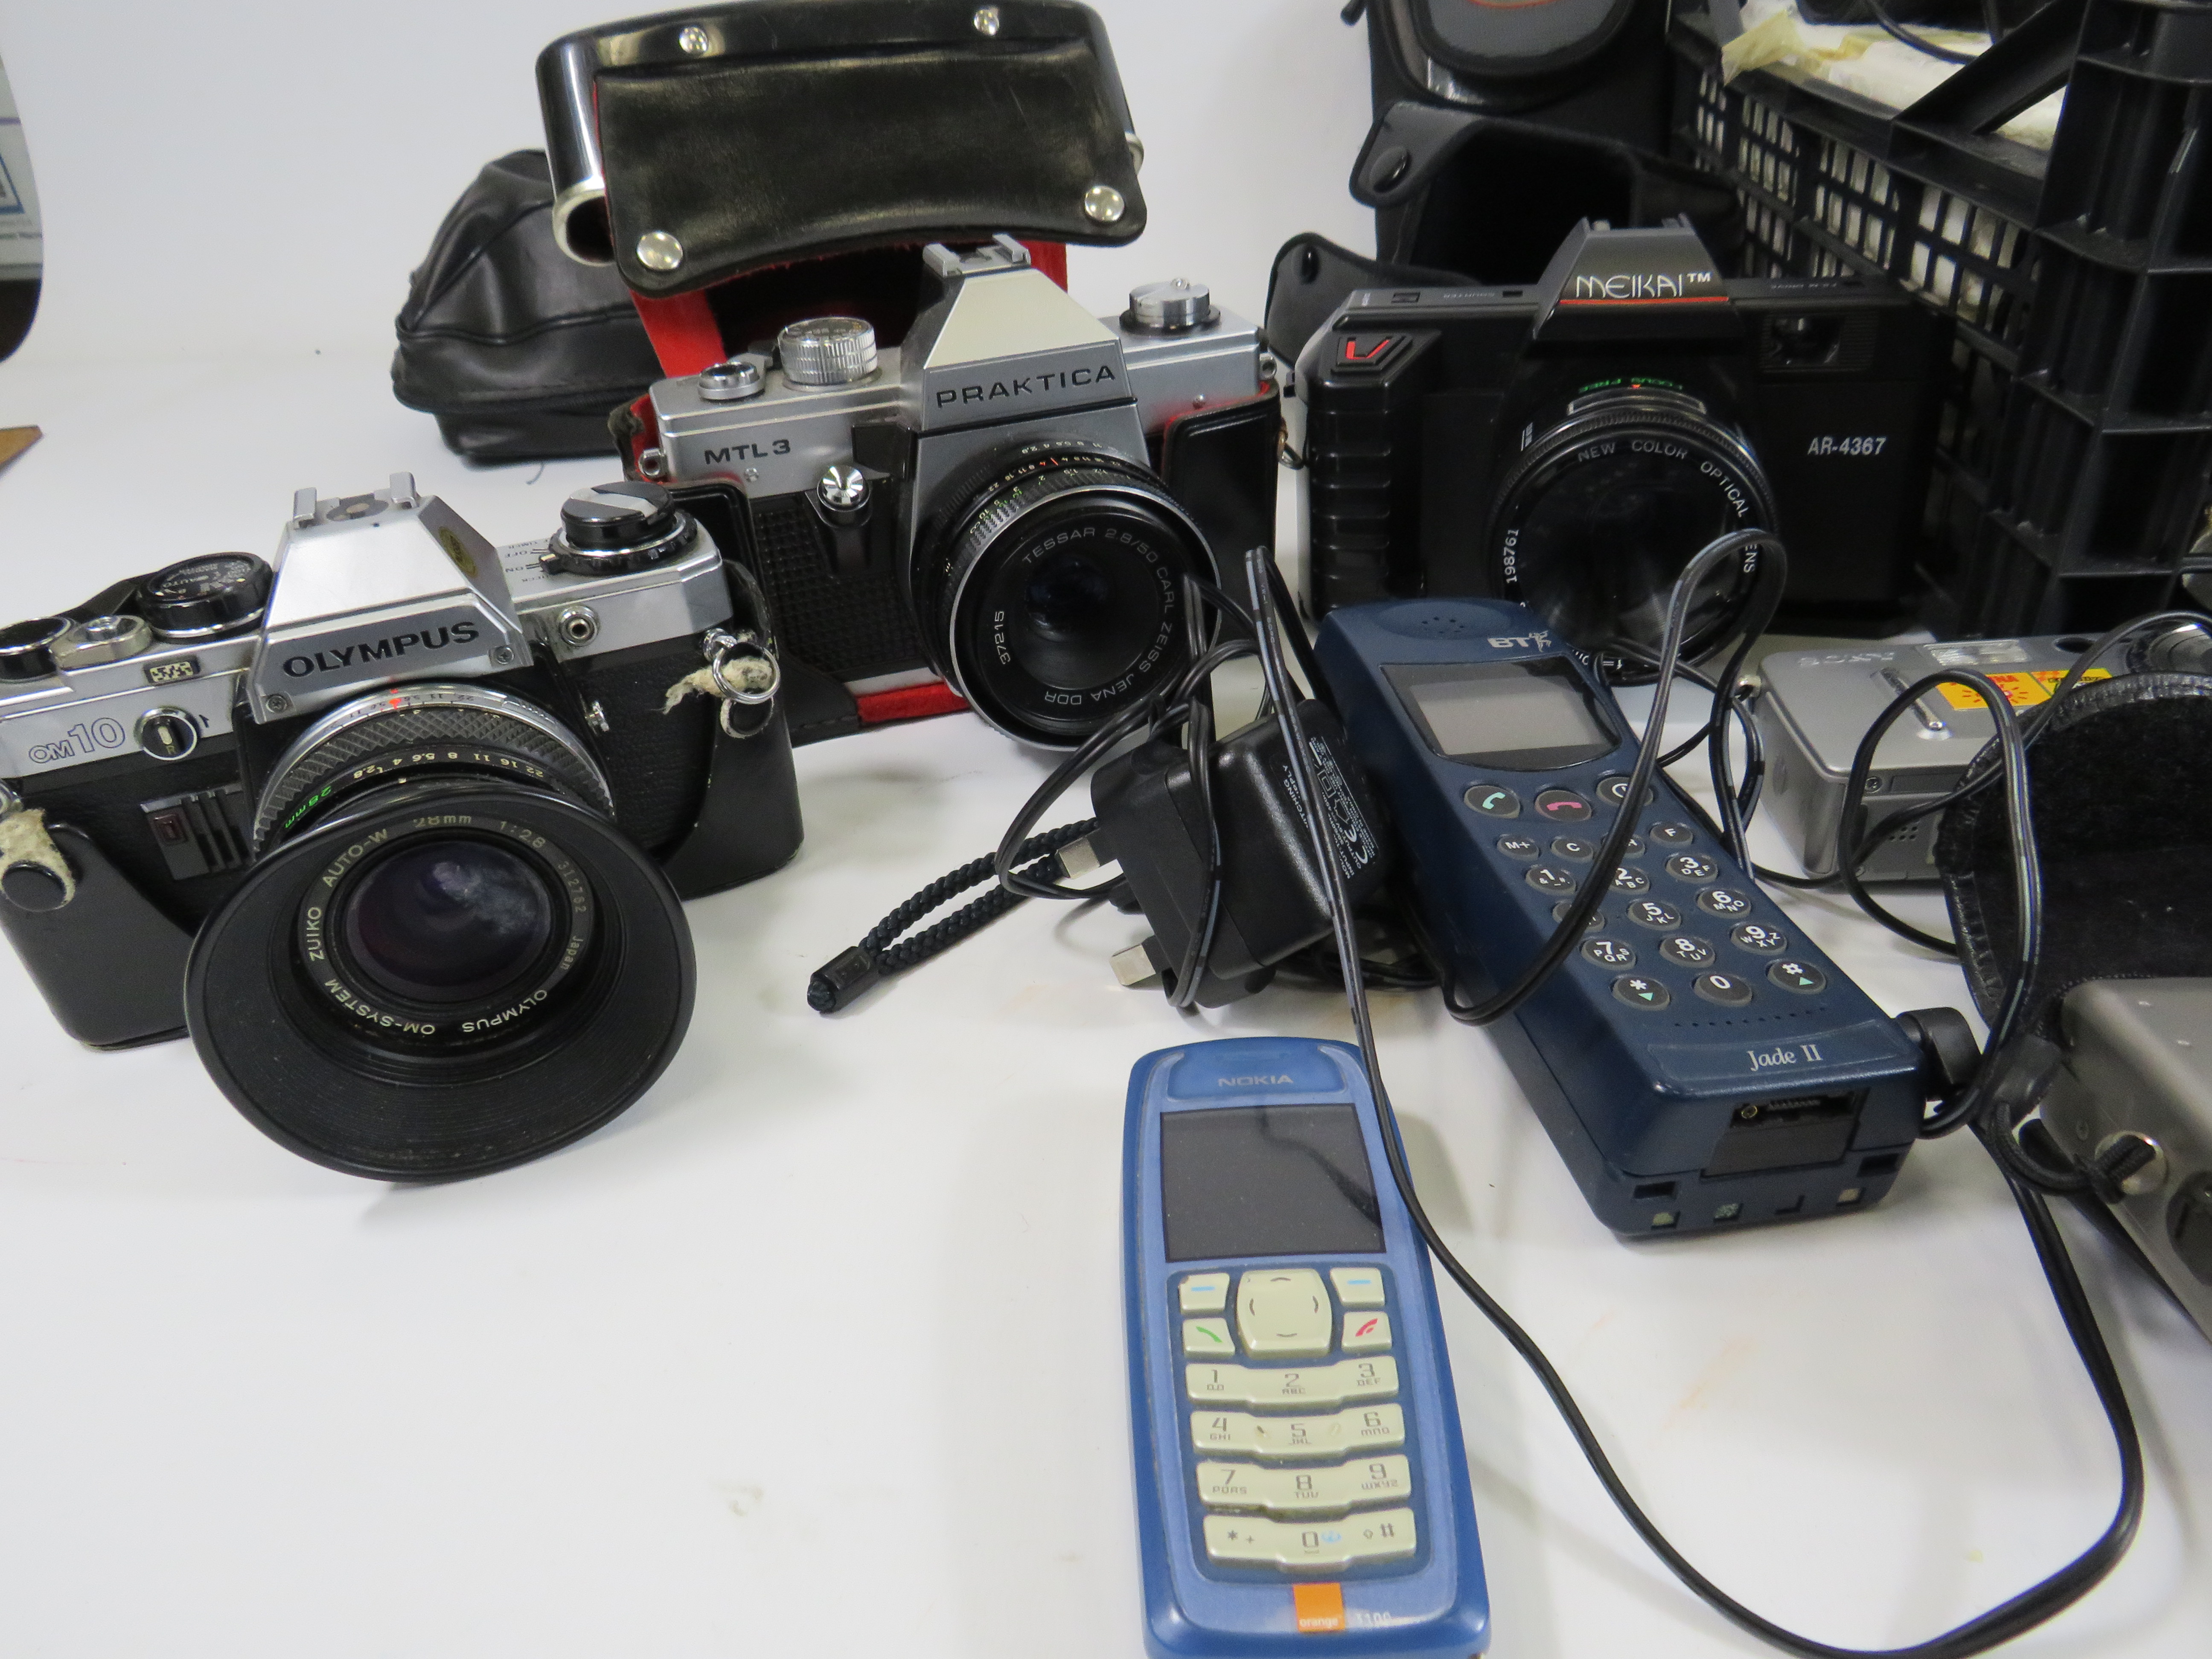 Large selection of vintage Cameras and mobile phones, including Practika, Olympus etc. - Bild 2 aus 3